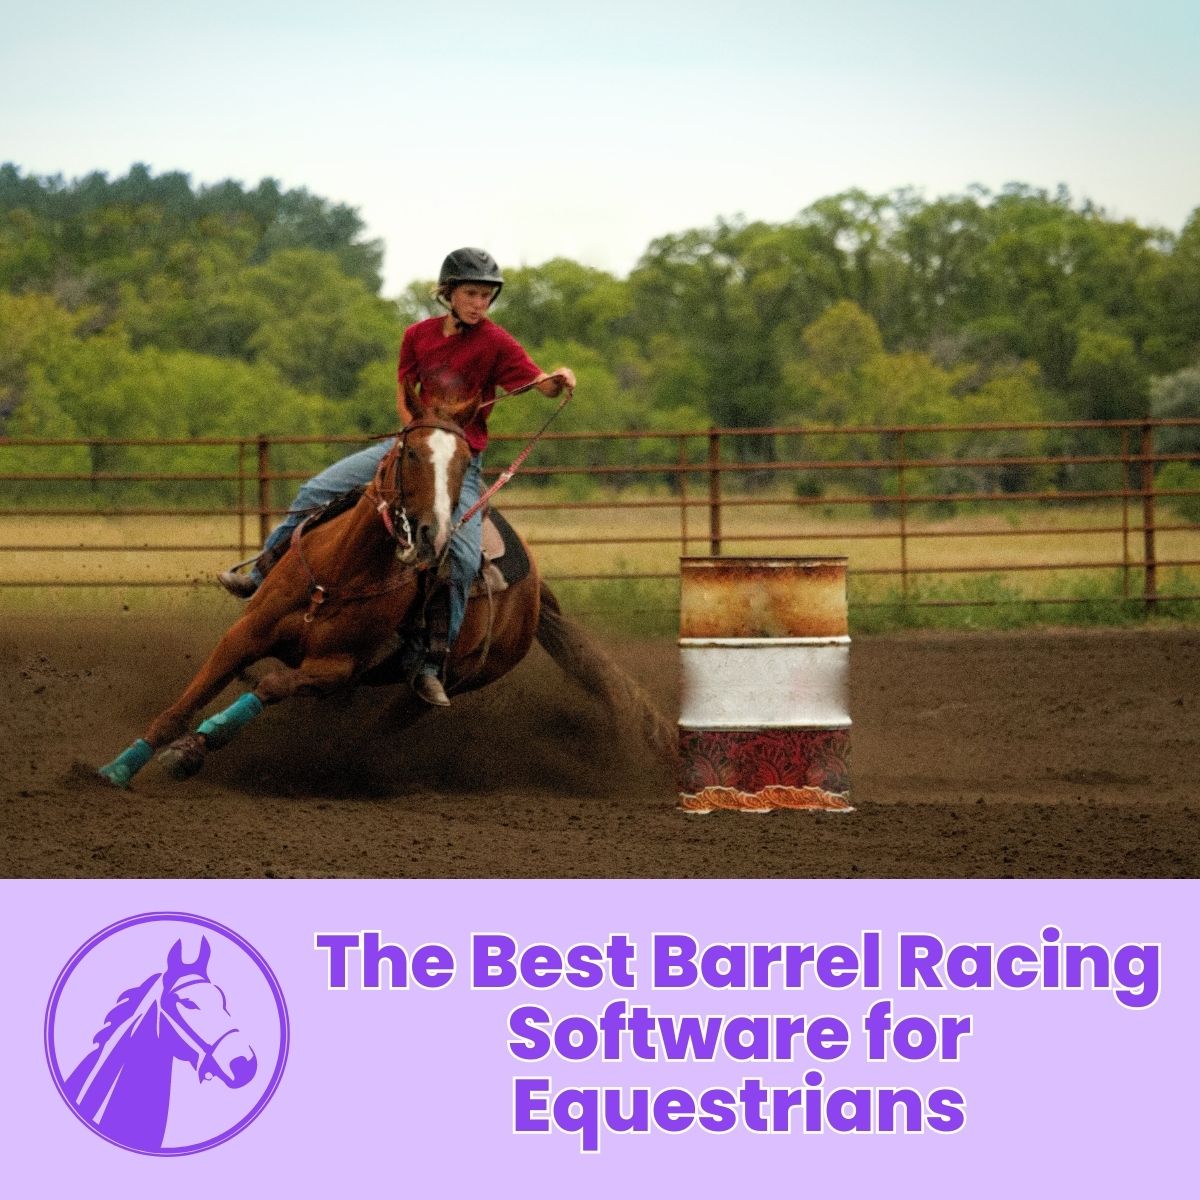 You are currently viewing The Best Barrel Racing Software for Equestrians